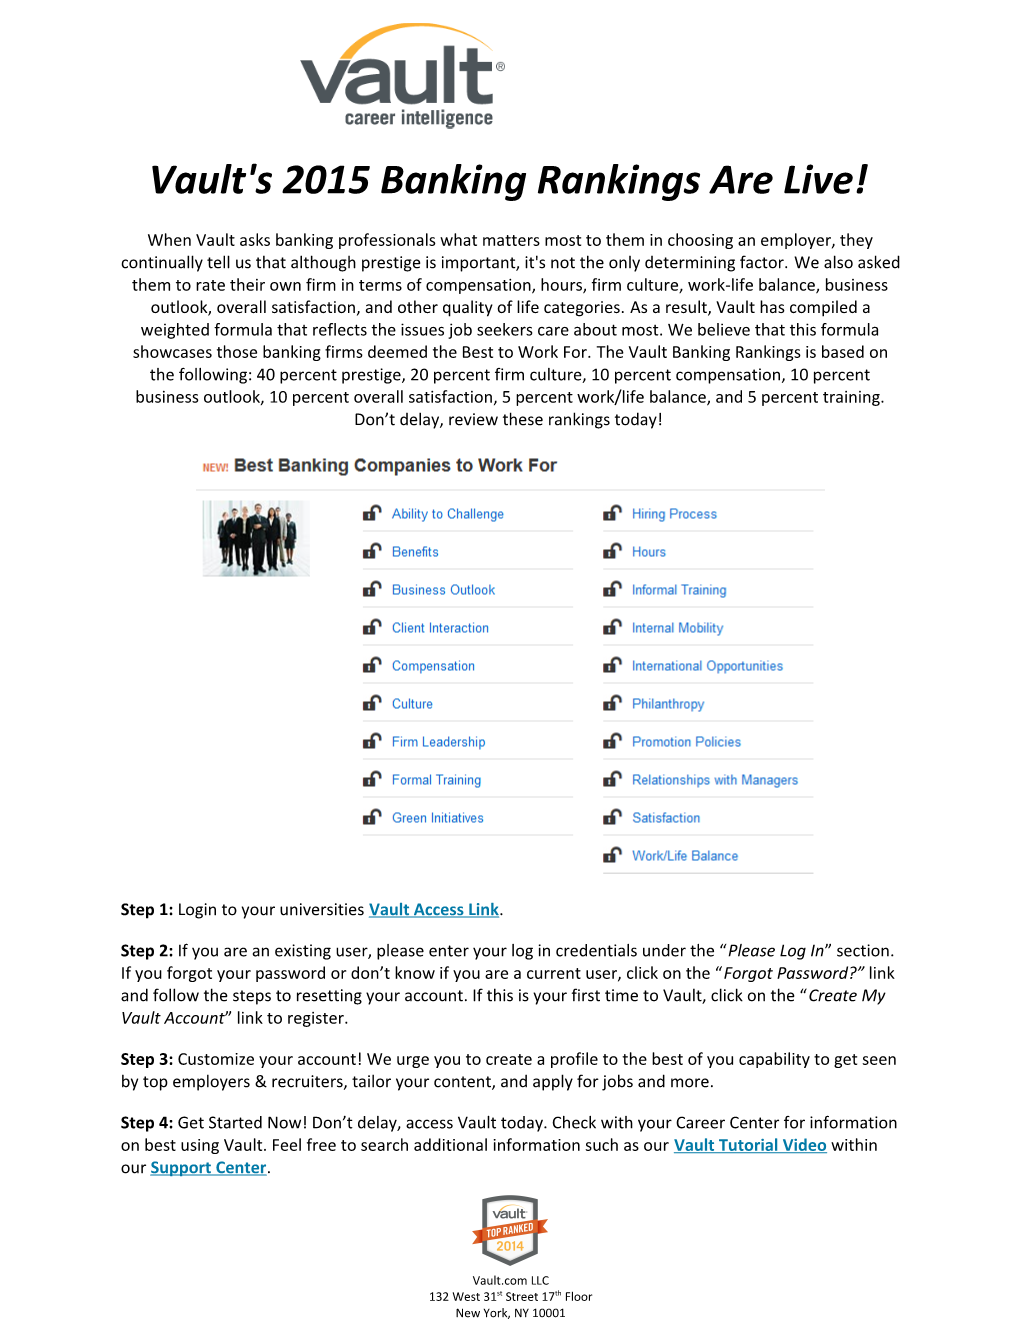 Vault's 2015 Banking Rankings Are Live!